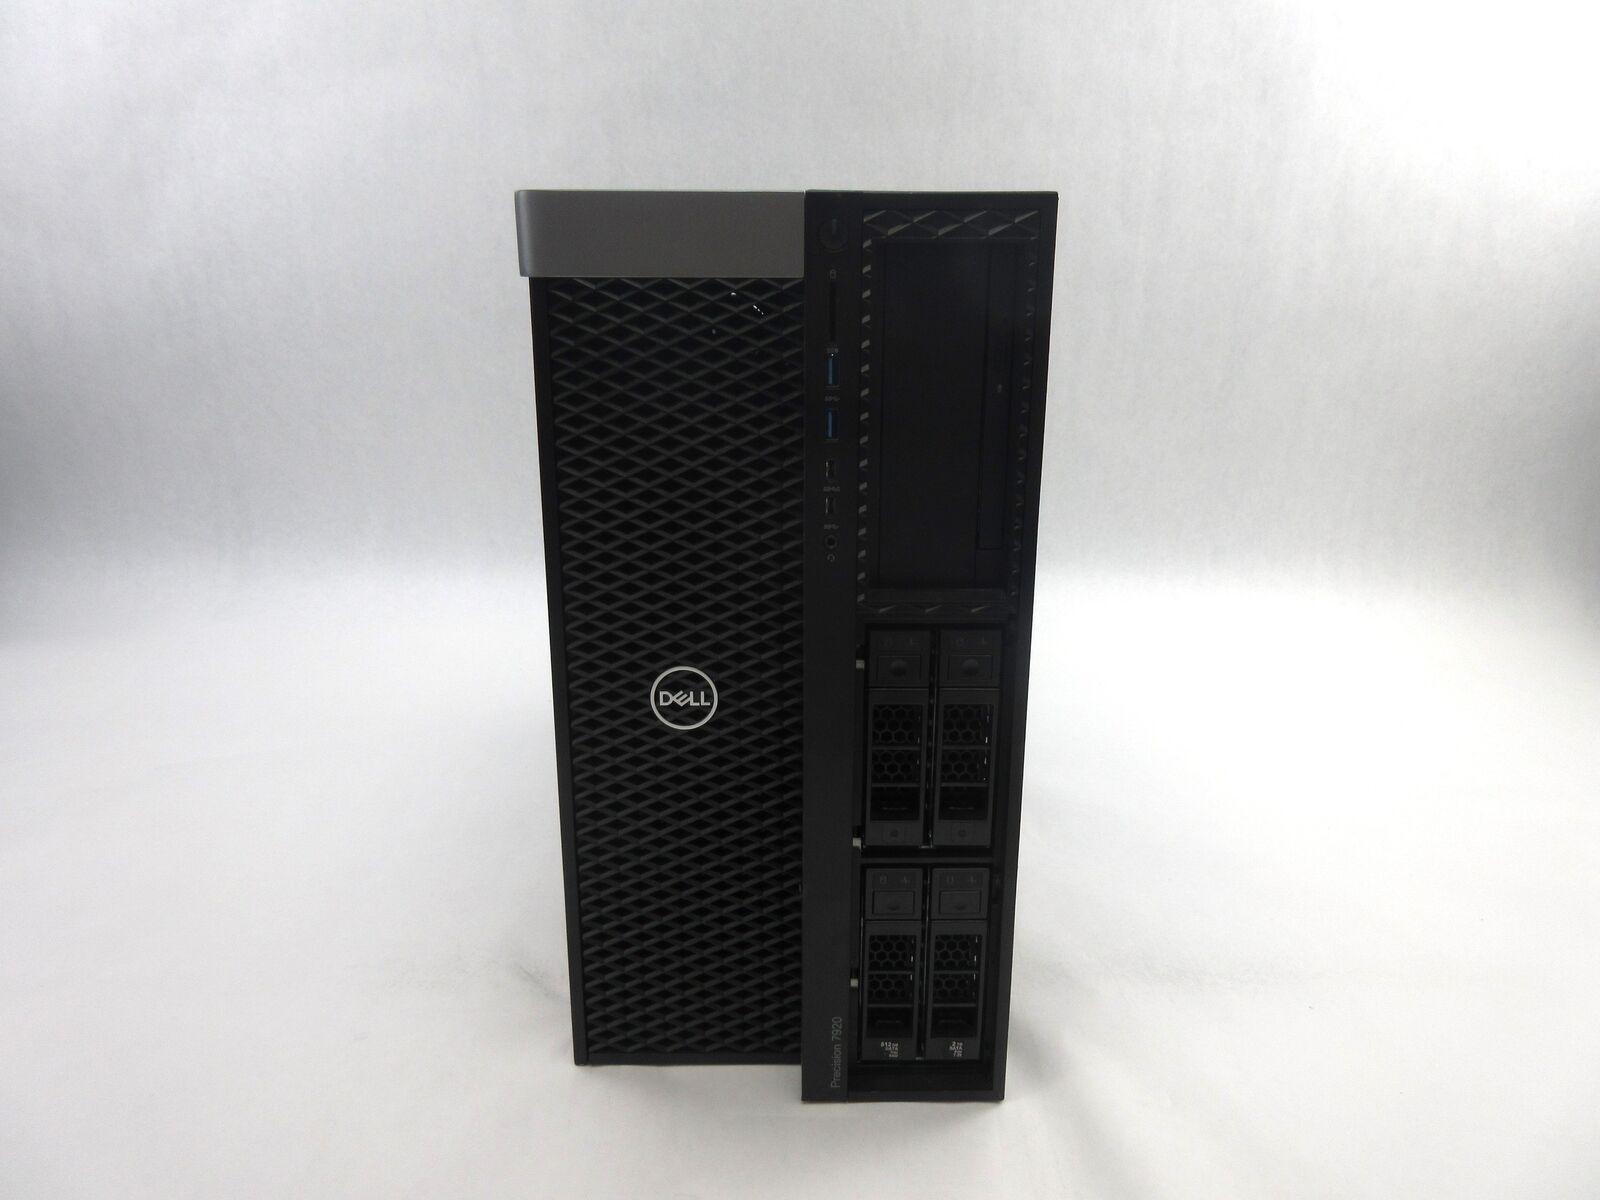 Dell Precision 7920 Tower 2x Xeon Gold 6128 3.4GHz 32GB RAM GT 710 No HDD C4*419